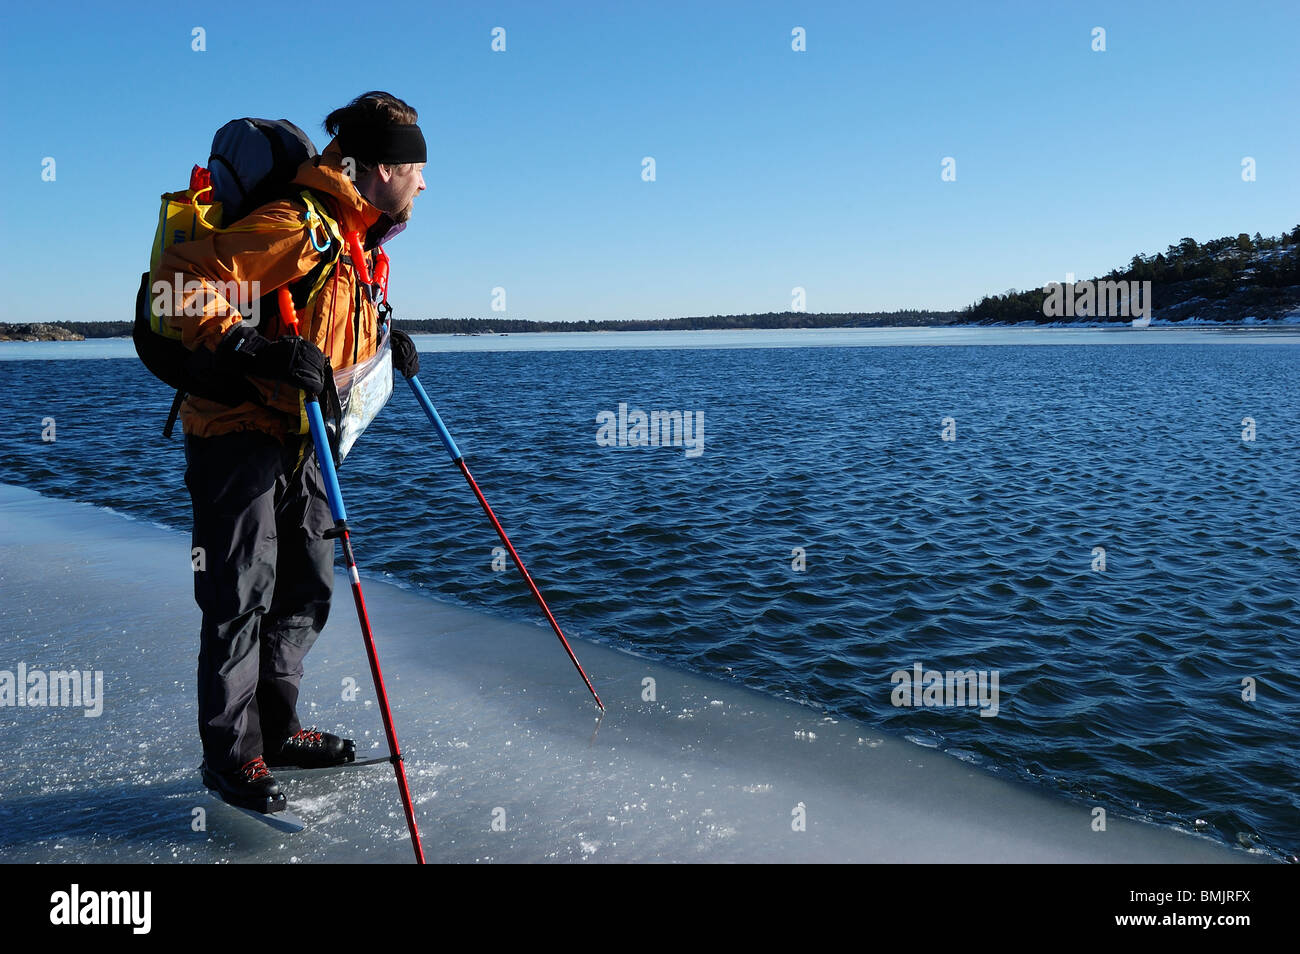 A man by the edge of the ice Stock Photo